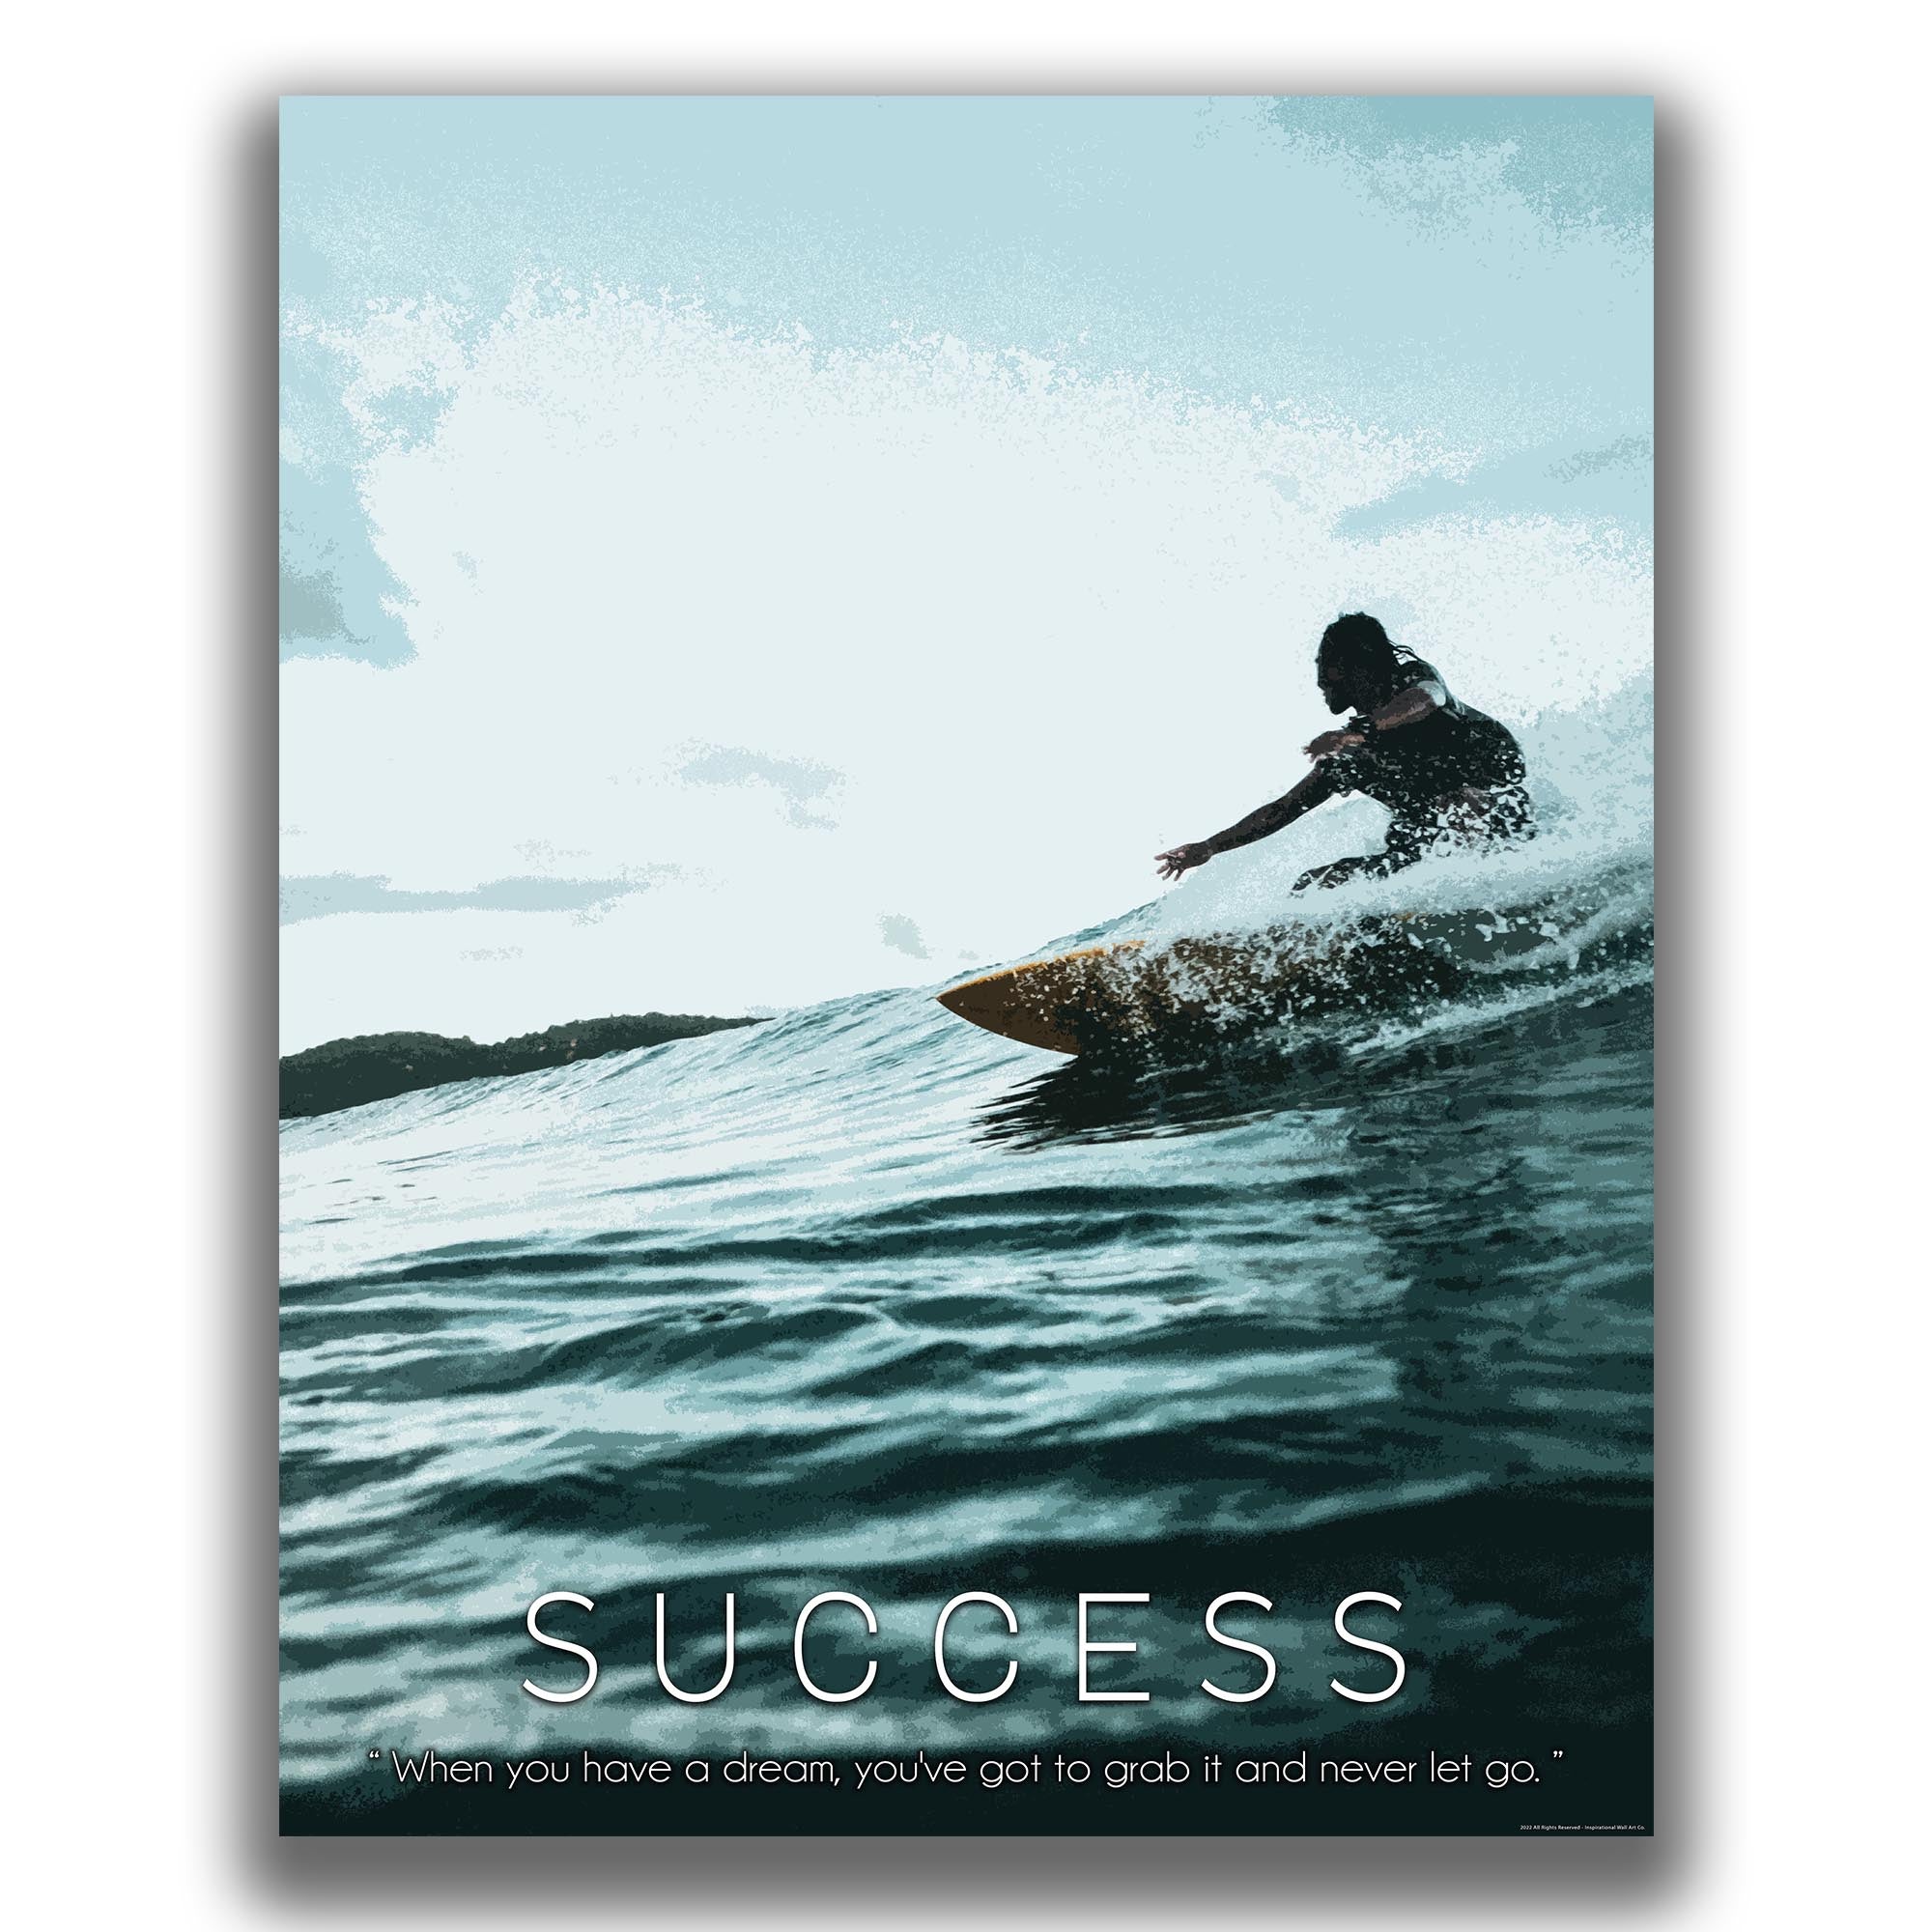 Success - Surfing Poster